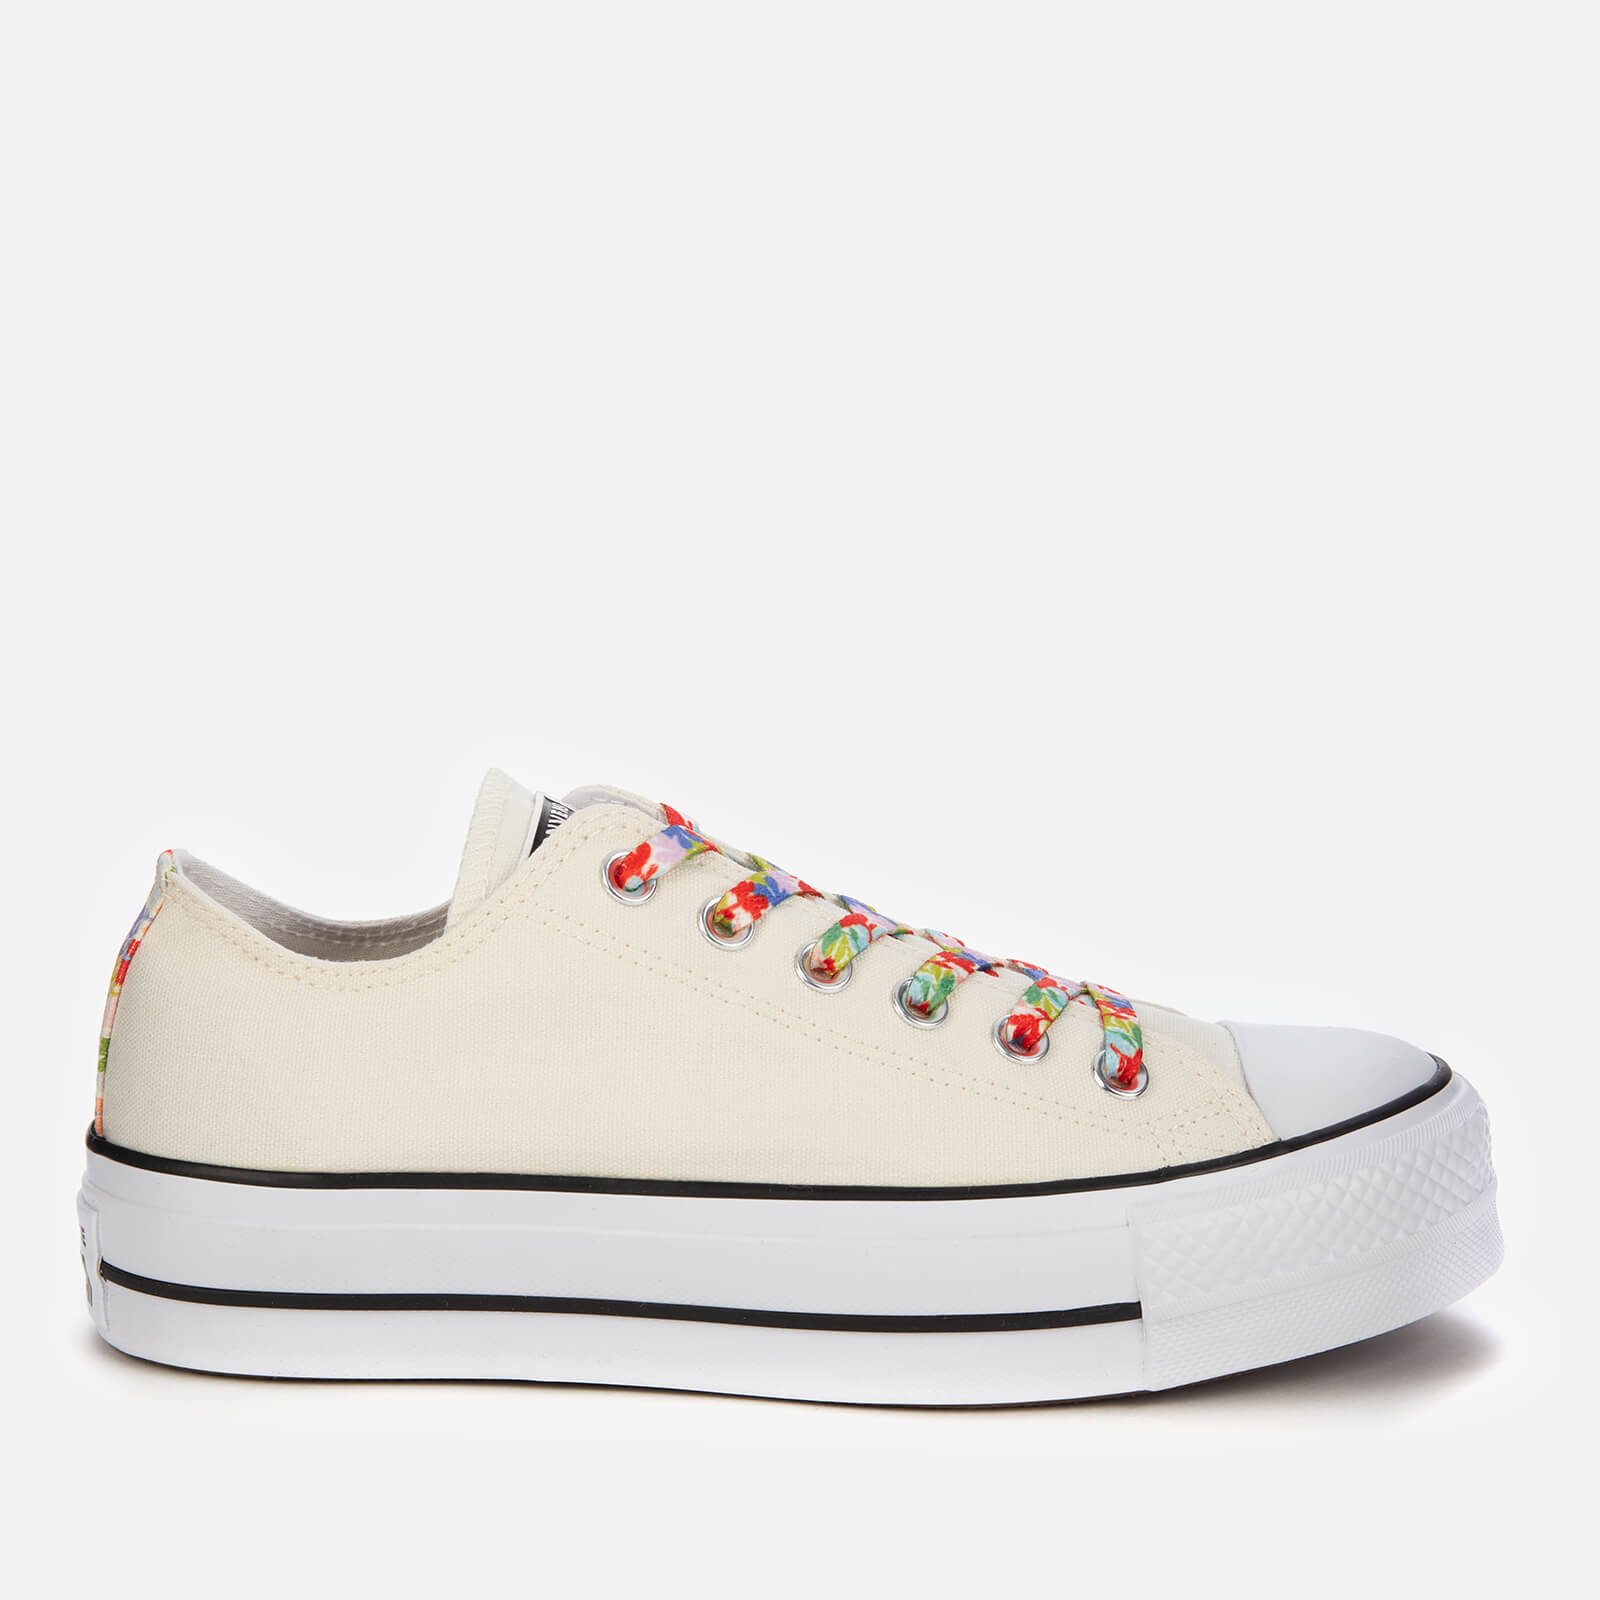 Converse Women's Chuck Taylor All Star Garden Party Platform Ox Trainers - White - UK 3